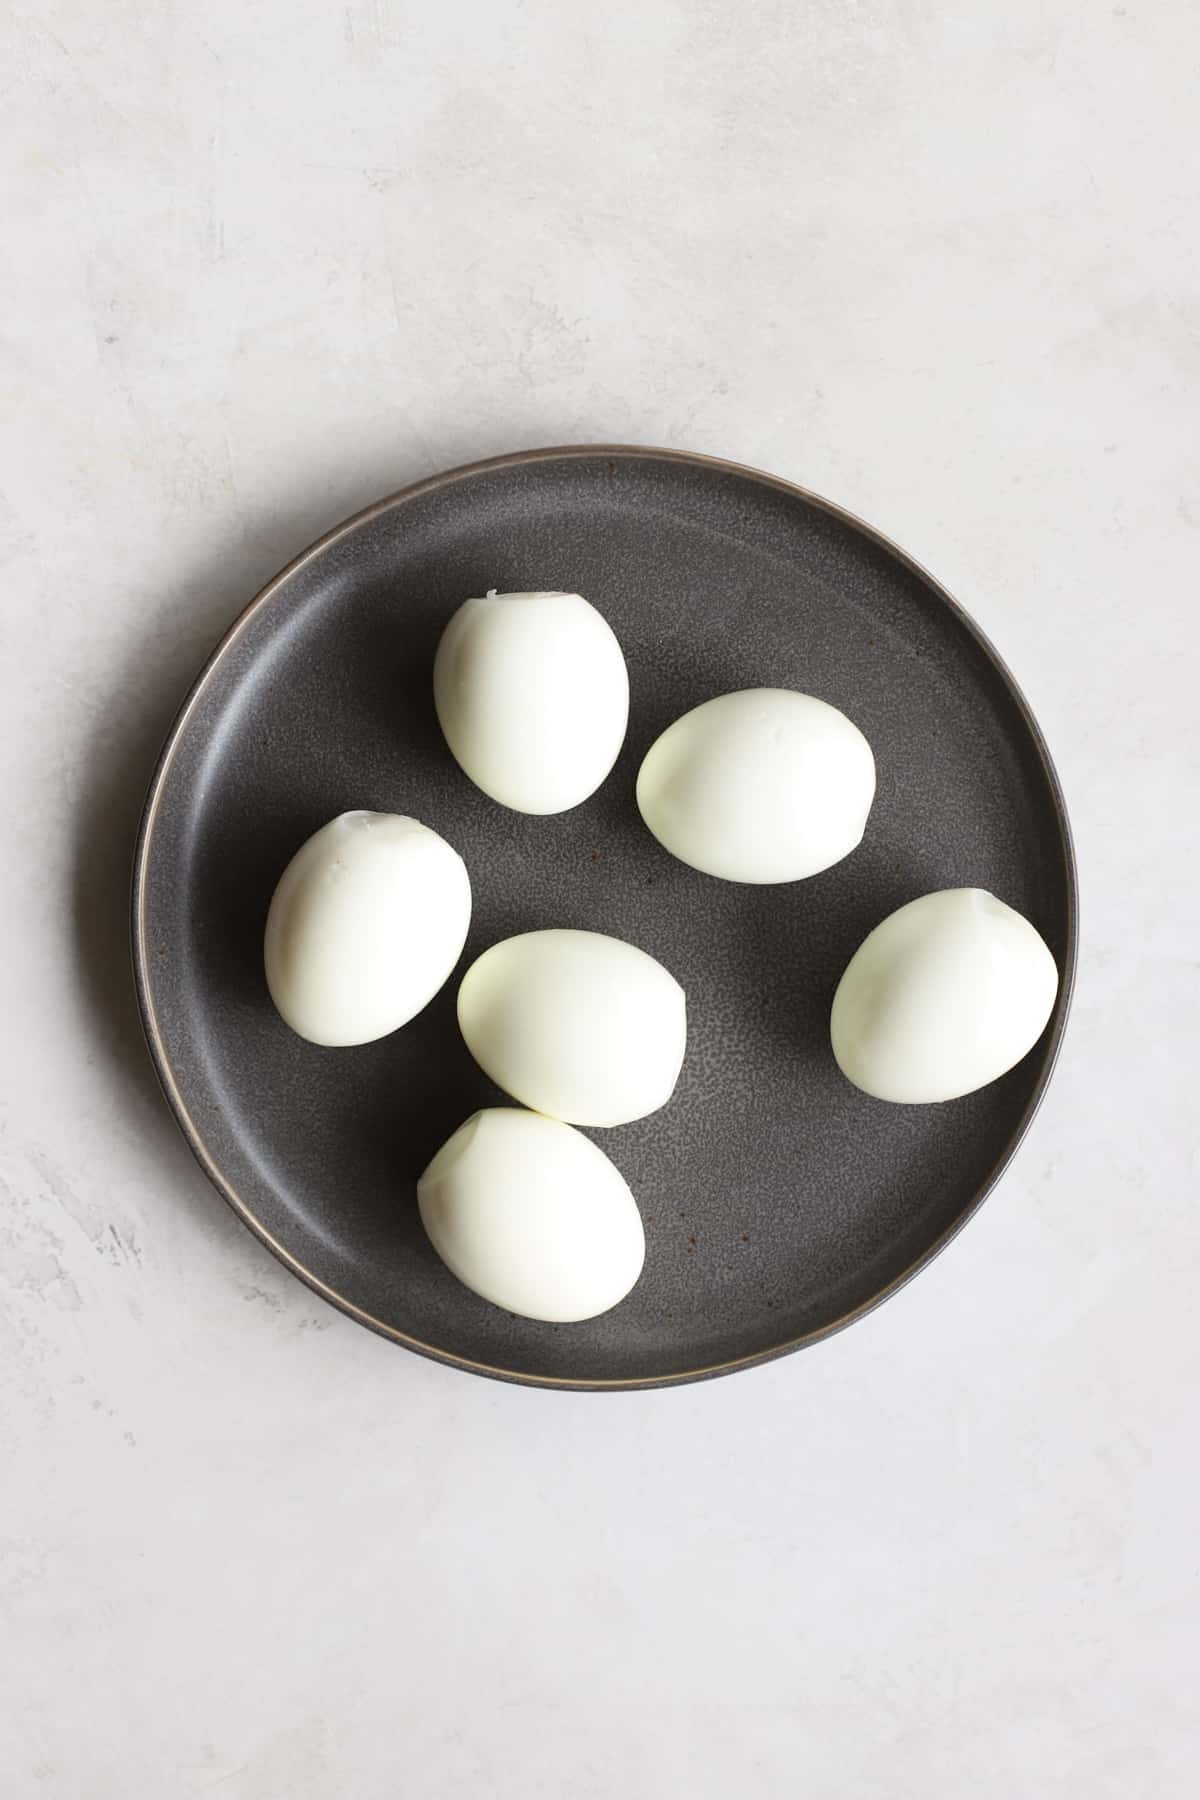 Six peeled hard-boiled eggs on gray plate on light gray surface